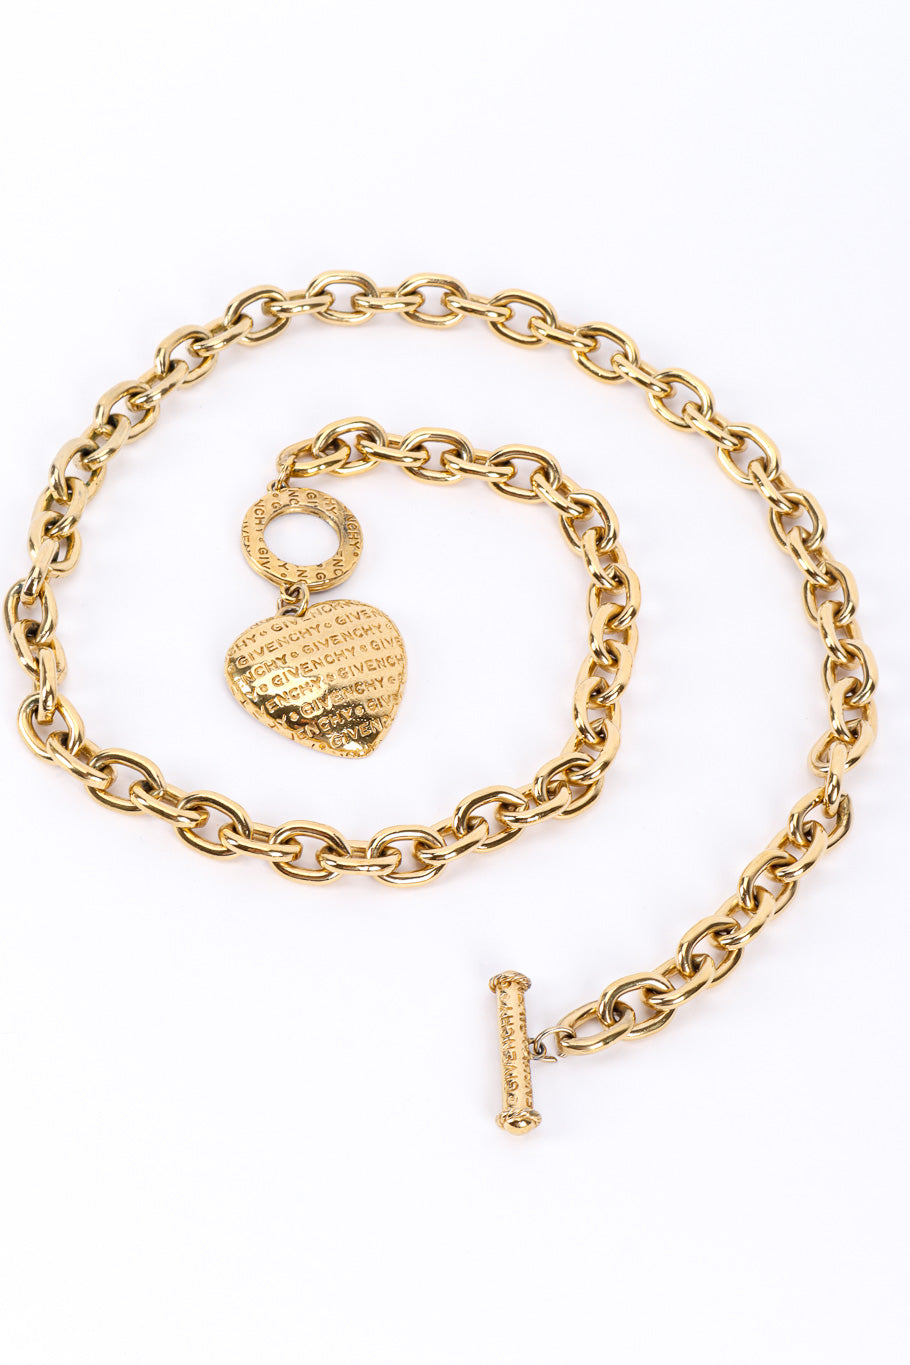 Heart charm necklace by Givenchy on white background in swirl @recessla